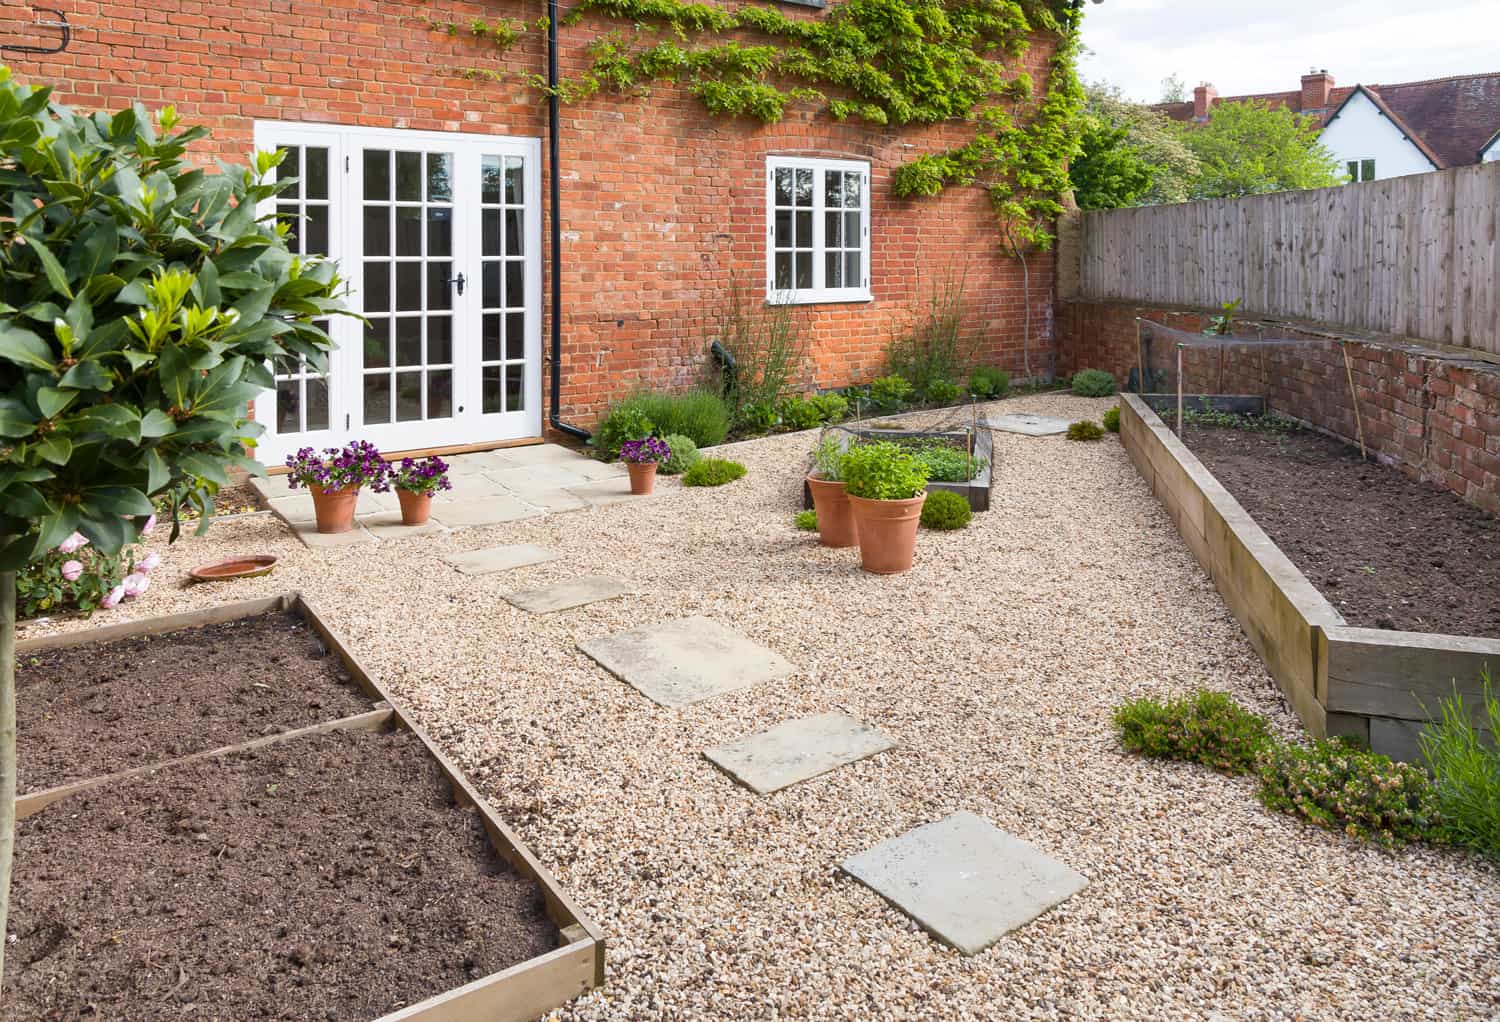 UK garden in spring with empty vegetable beds. Courtyard style Victorian garden with gravel and York stone paving.